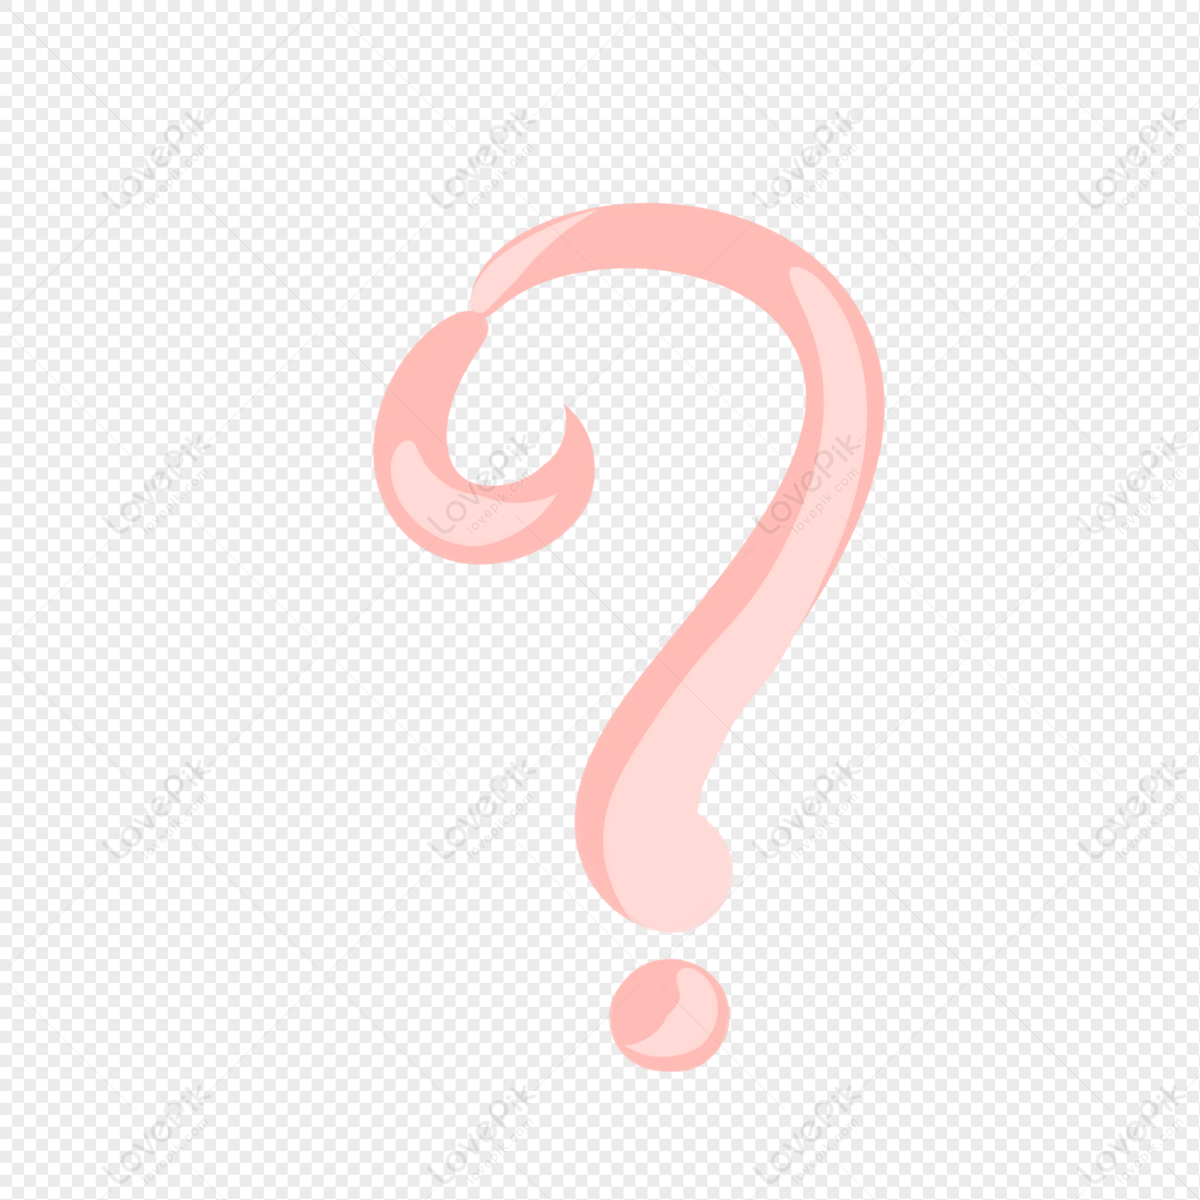 Question Mark PNG White Transparent And Clipart Image For Free Download -  Lovepik | 401172802